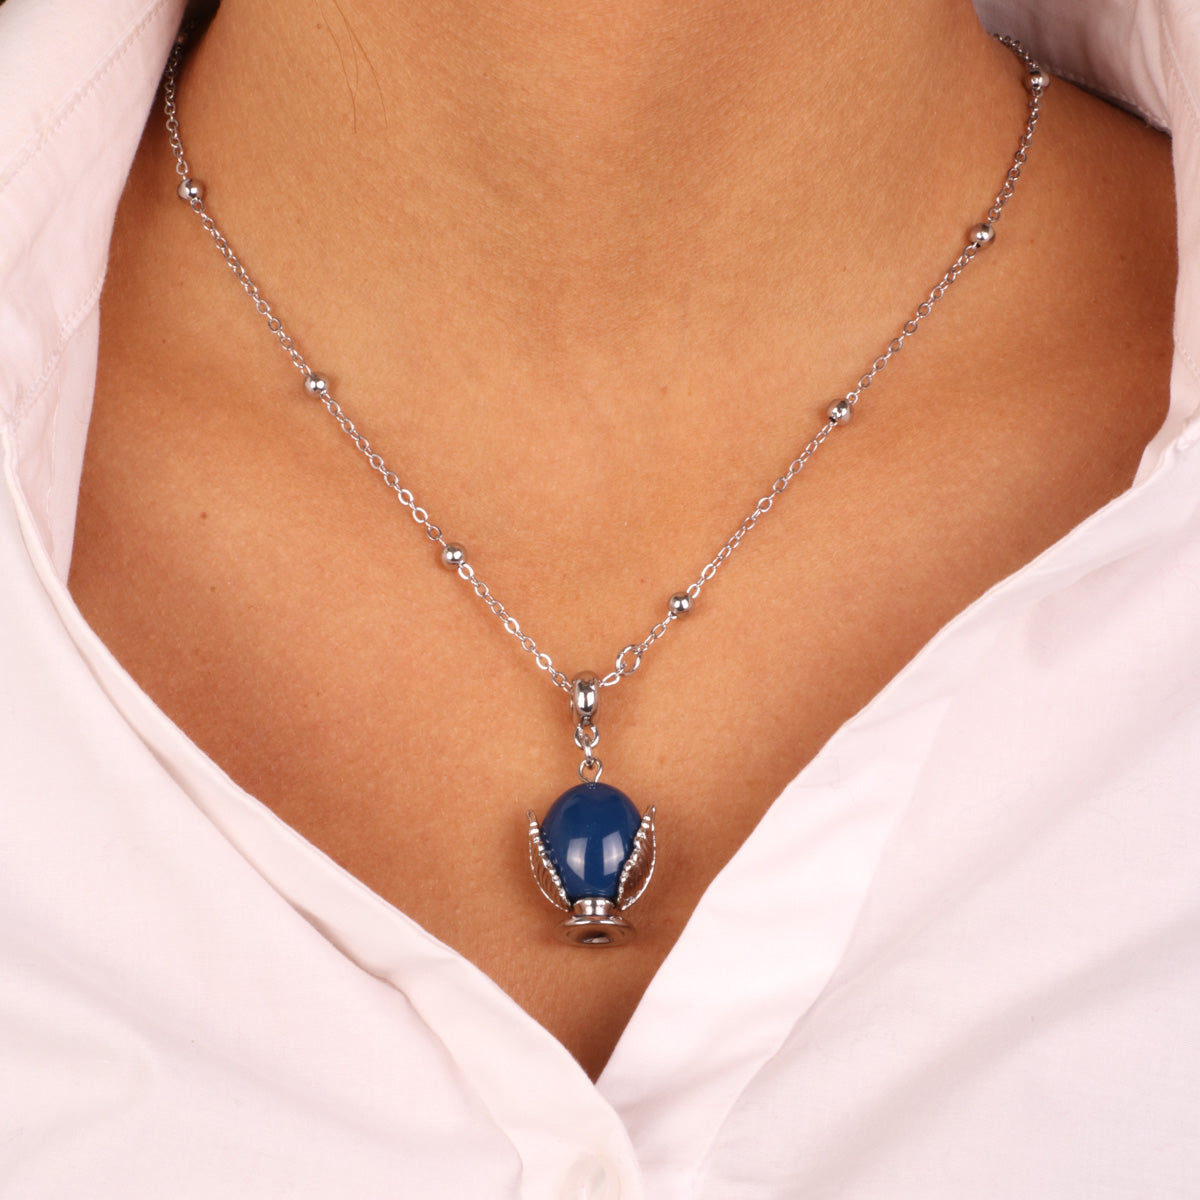 Metal necklace with blue enameled lucky pumo